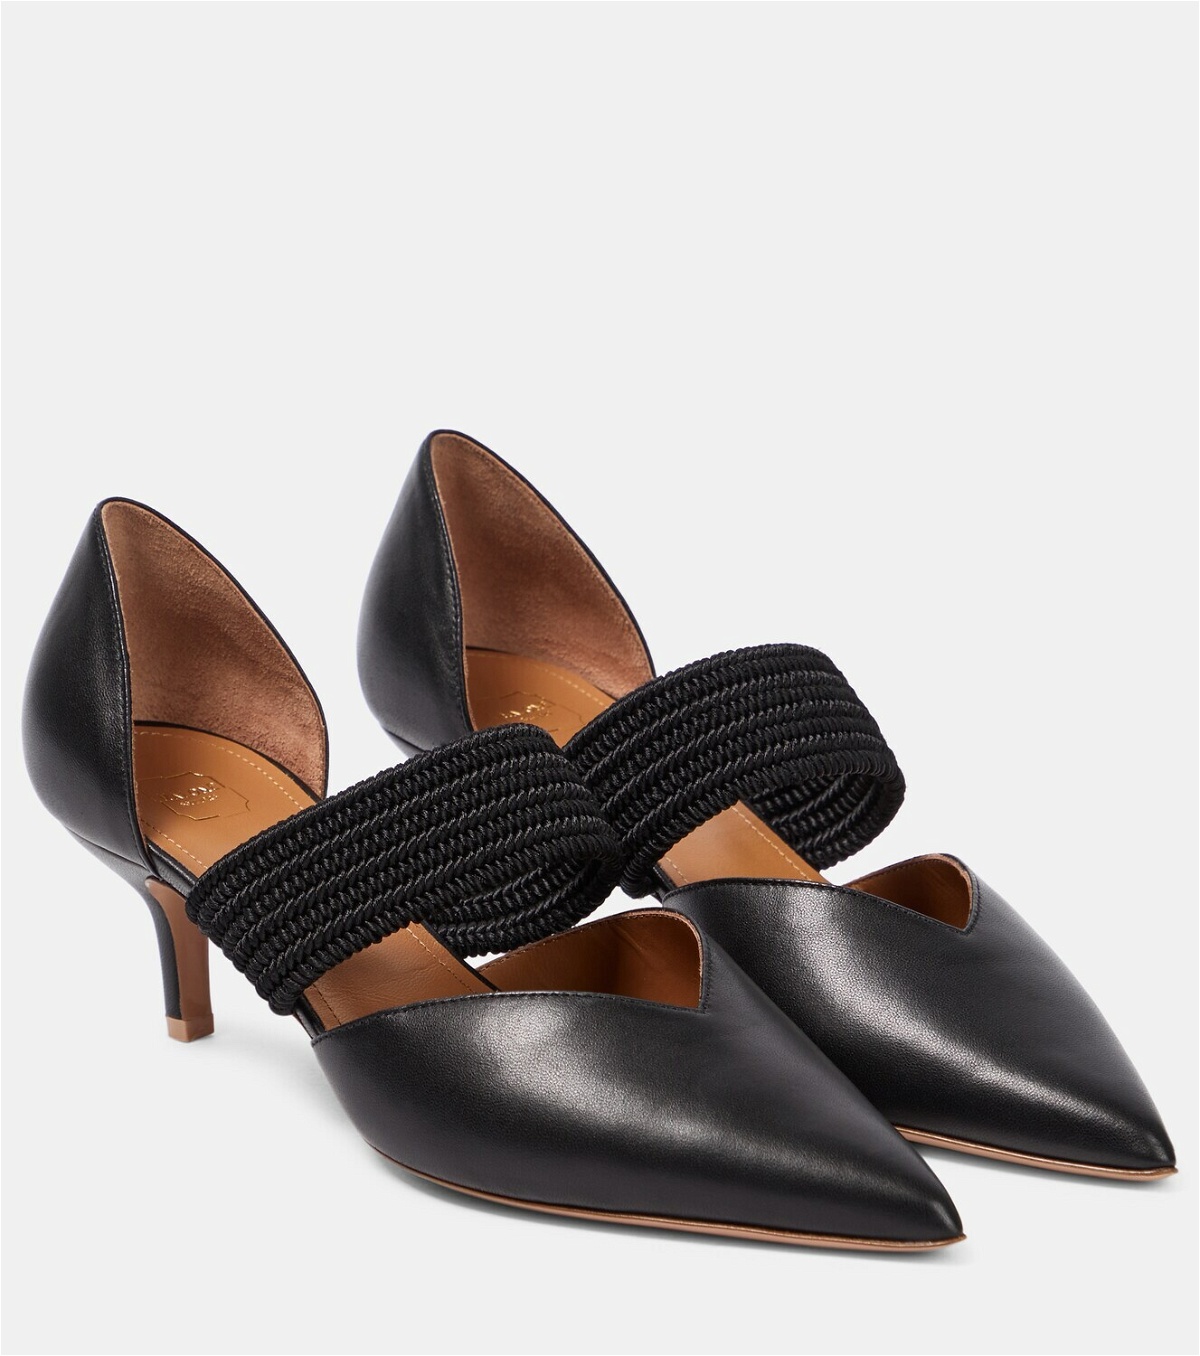 Malone Souliers Maisie 45 leather mules Malone Souliers